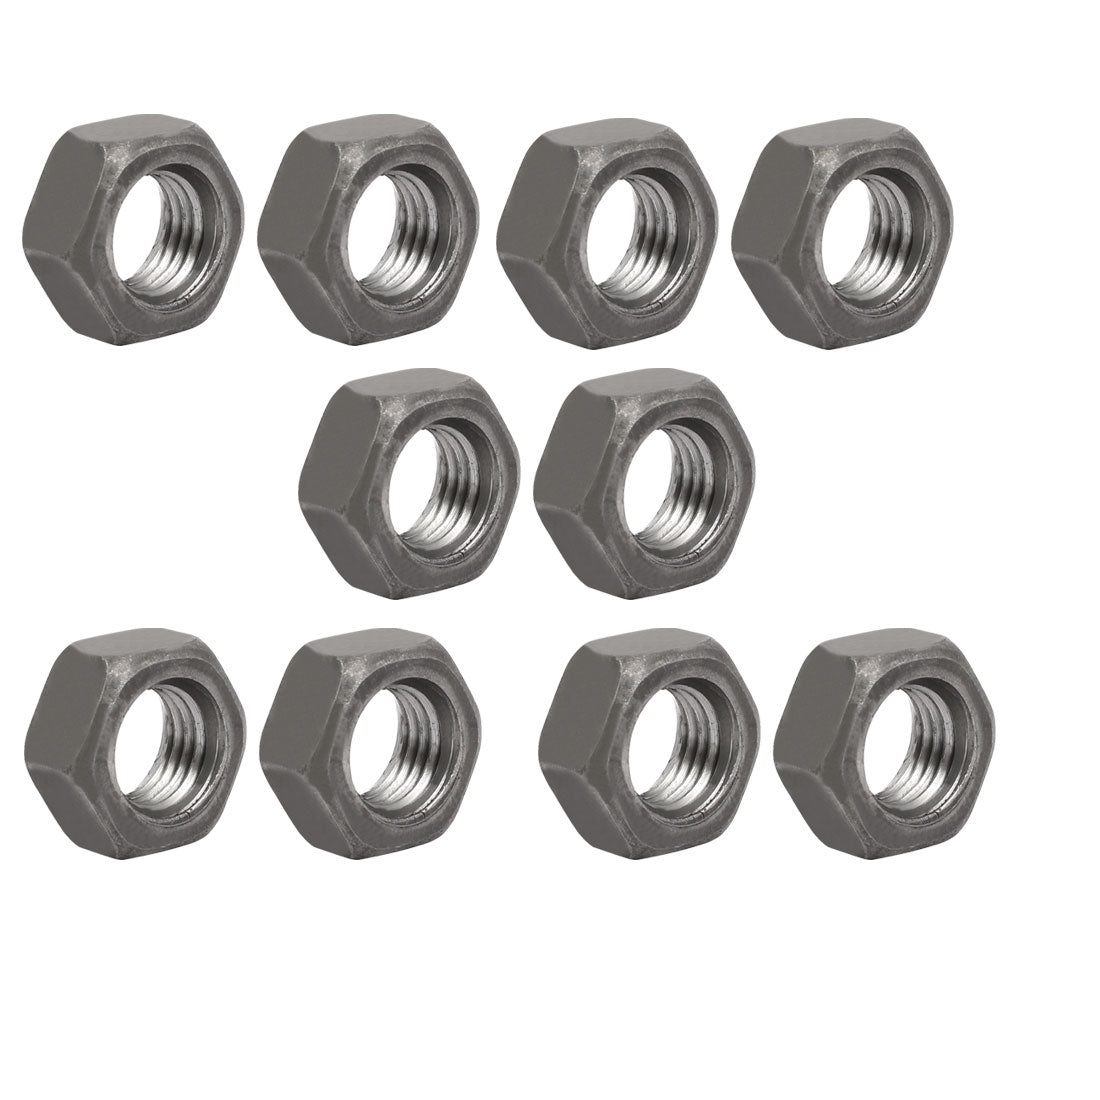 uxcell Uxcell 10pcs M12 x 1.5mm Pitch Metric Fine Thread Carbon Steel Left Hand Hex Nuts